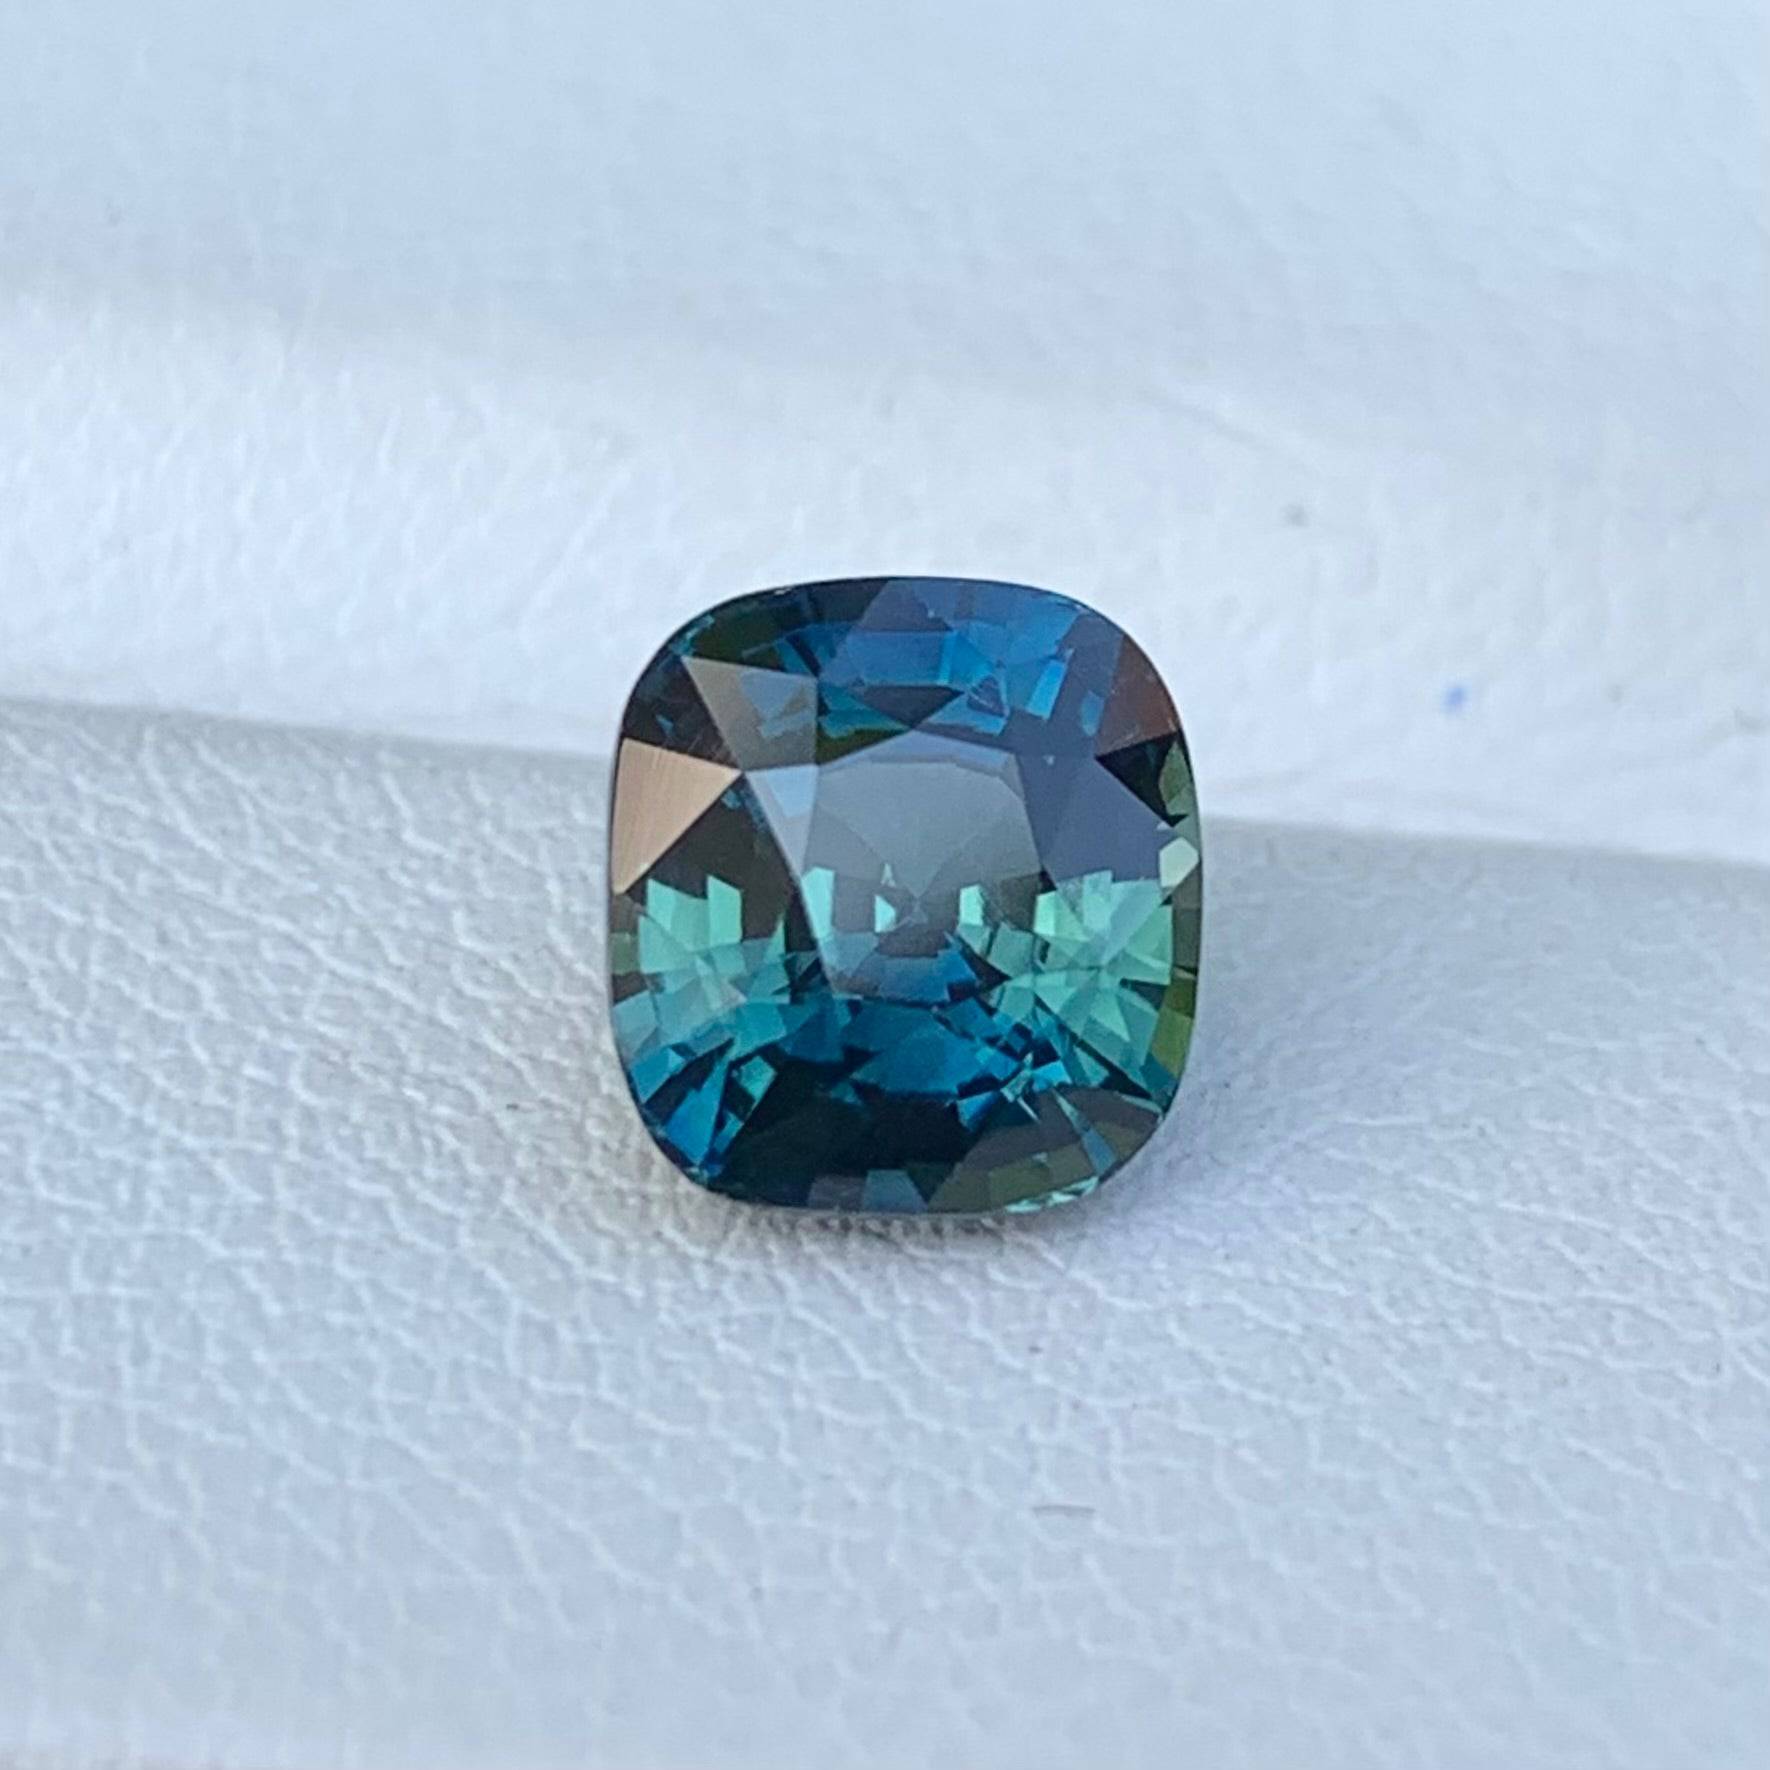 2.55 Cts Unheated Peacock Teal Sapphire - (N) - Baza Boutique 